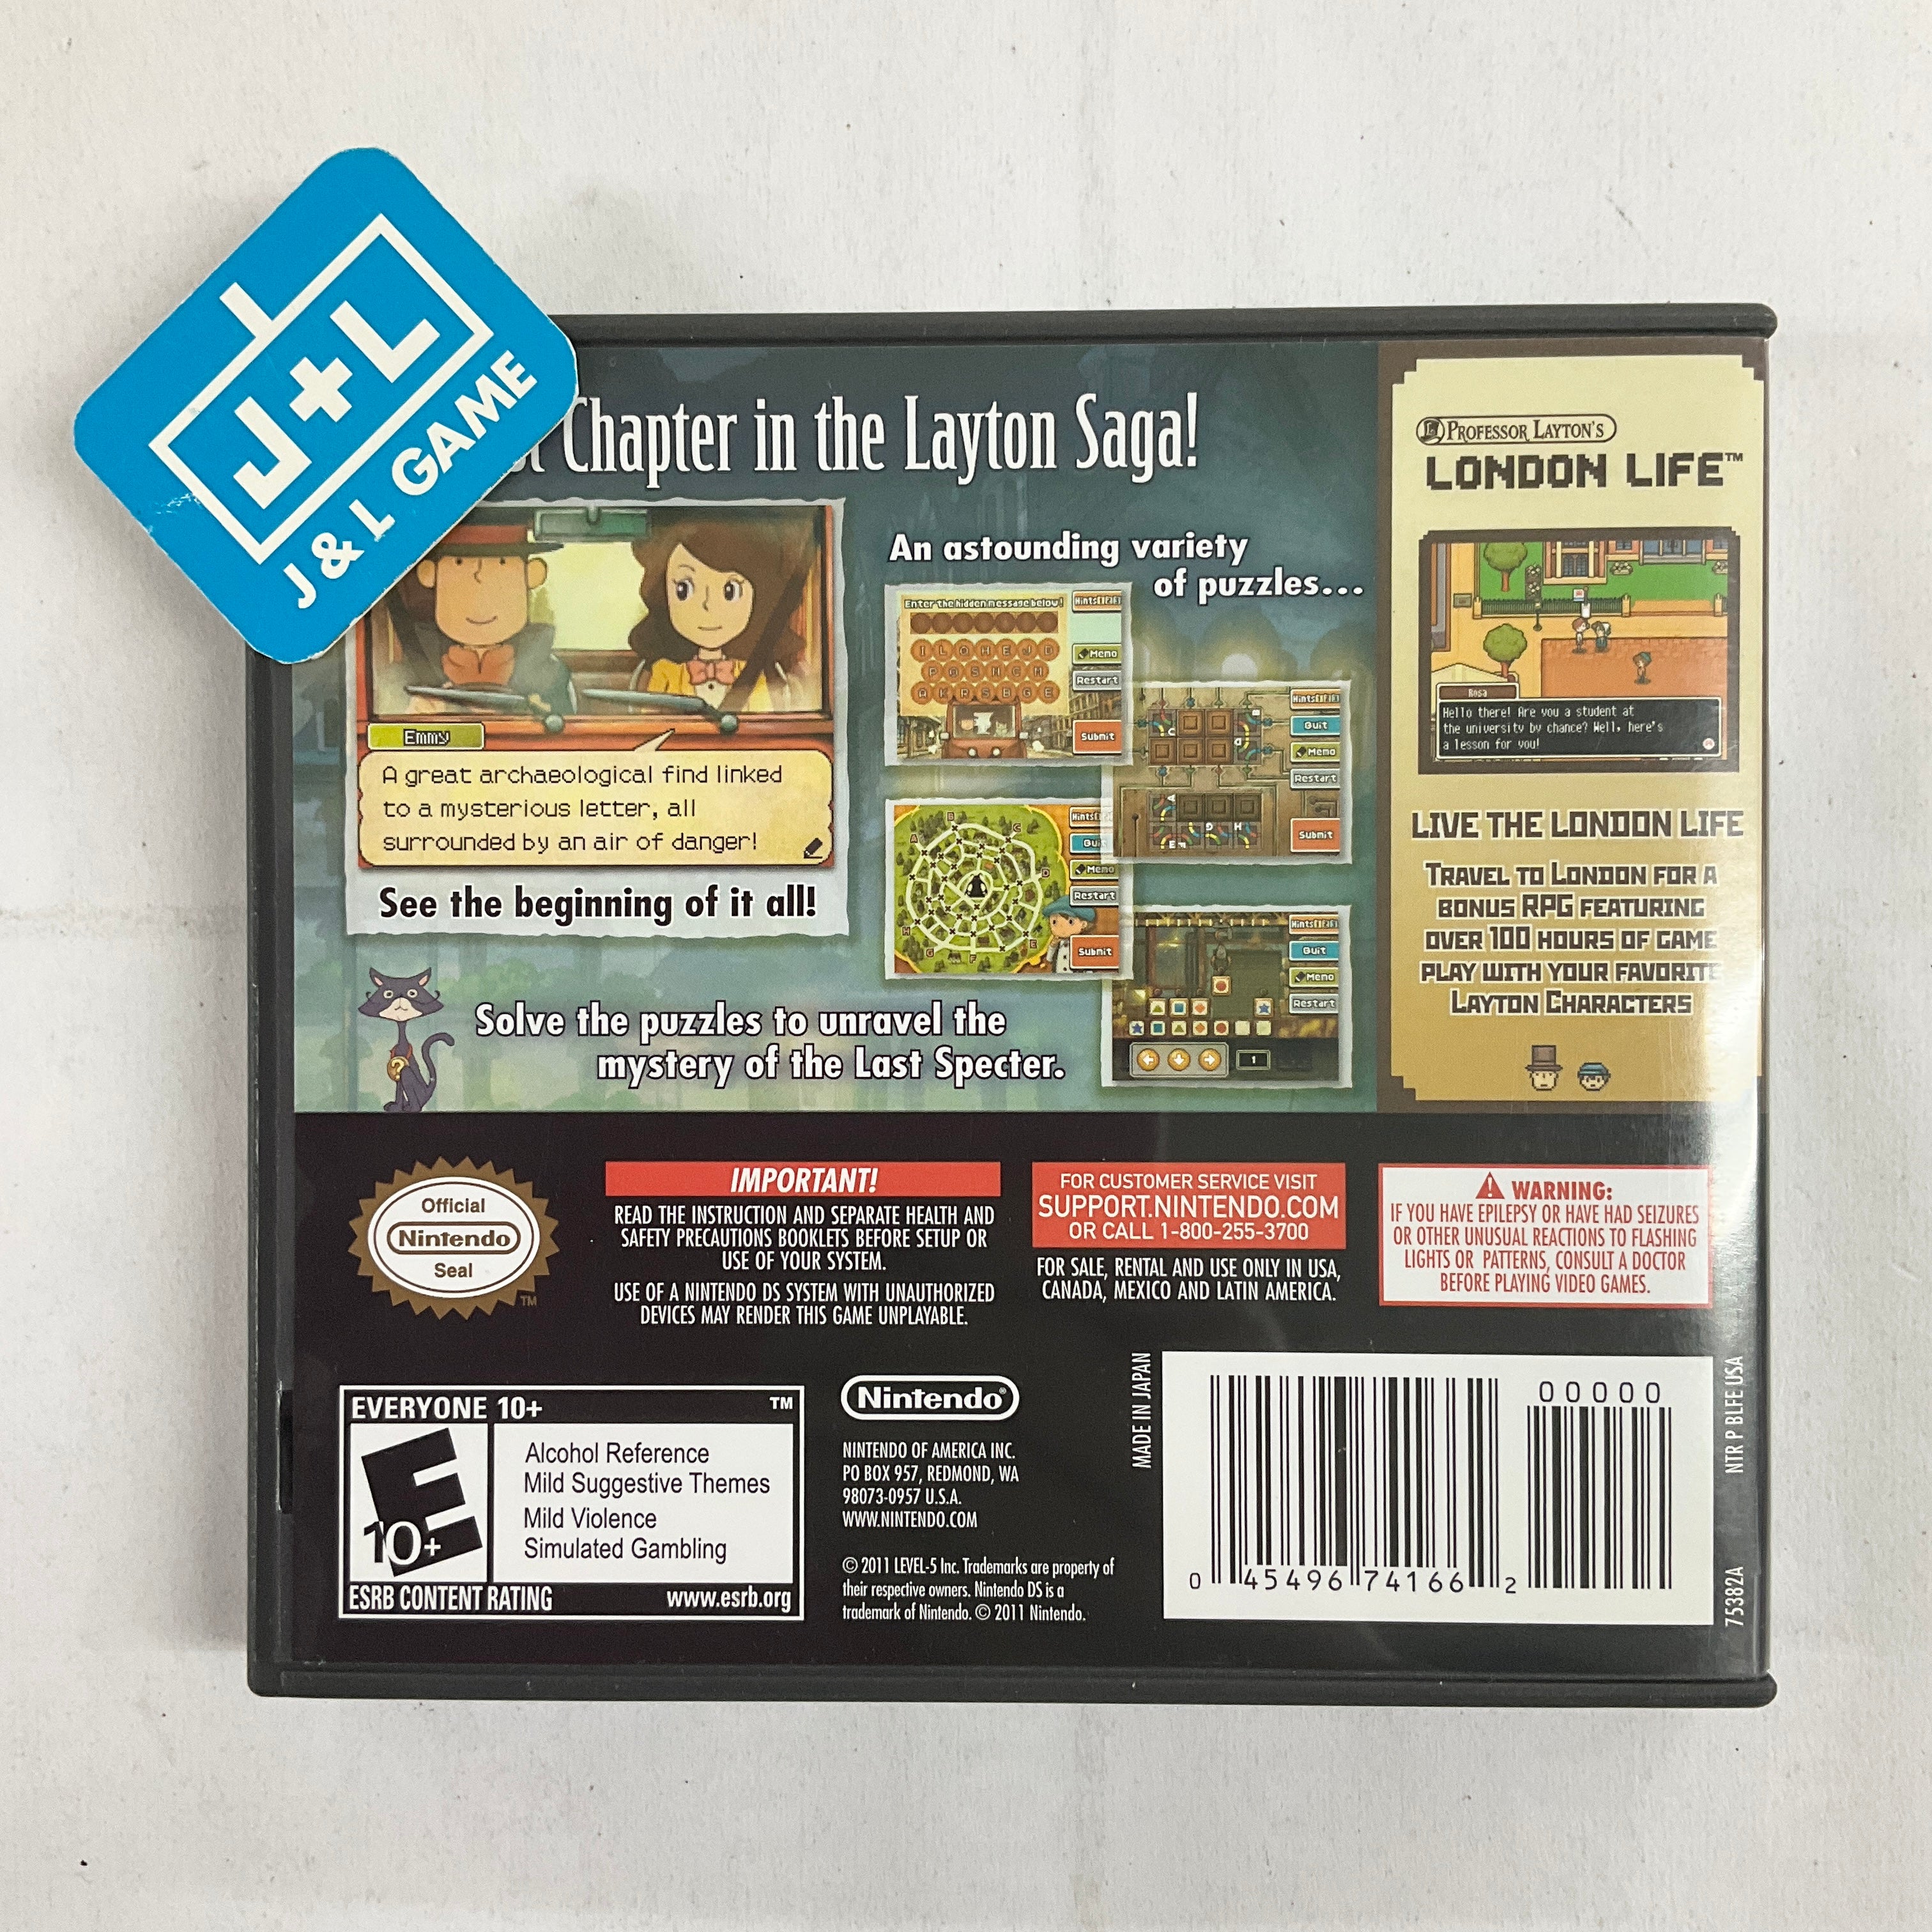 Professor Layton and the Last Specter - (NDS) Nintendo DS [Pre-Owned] Video Games Level 5   